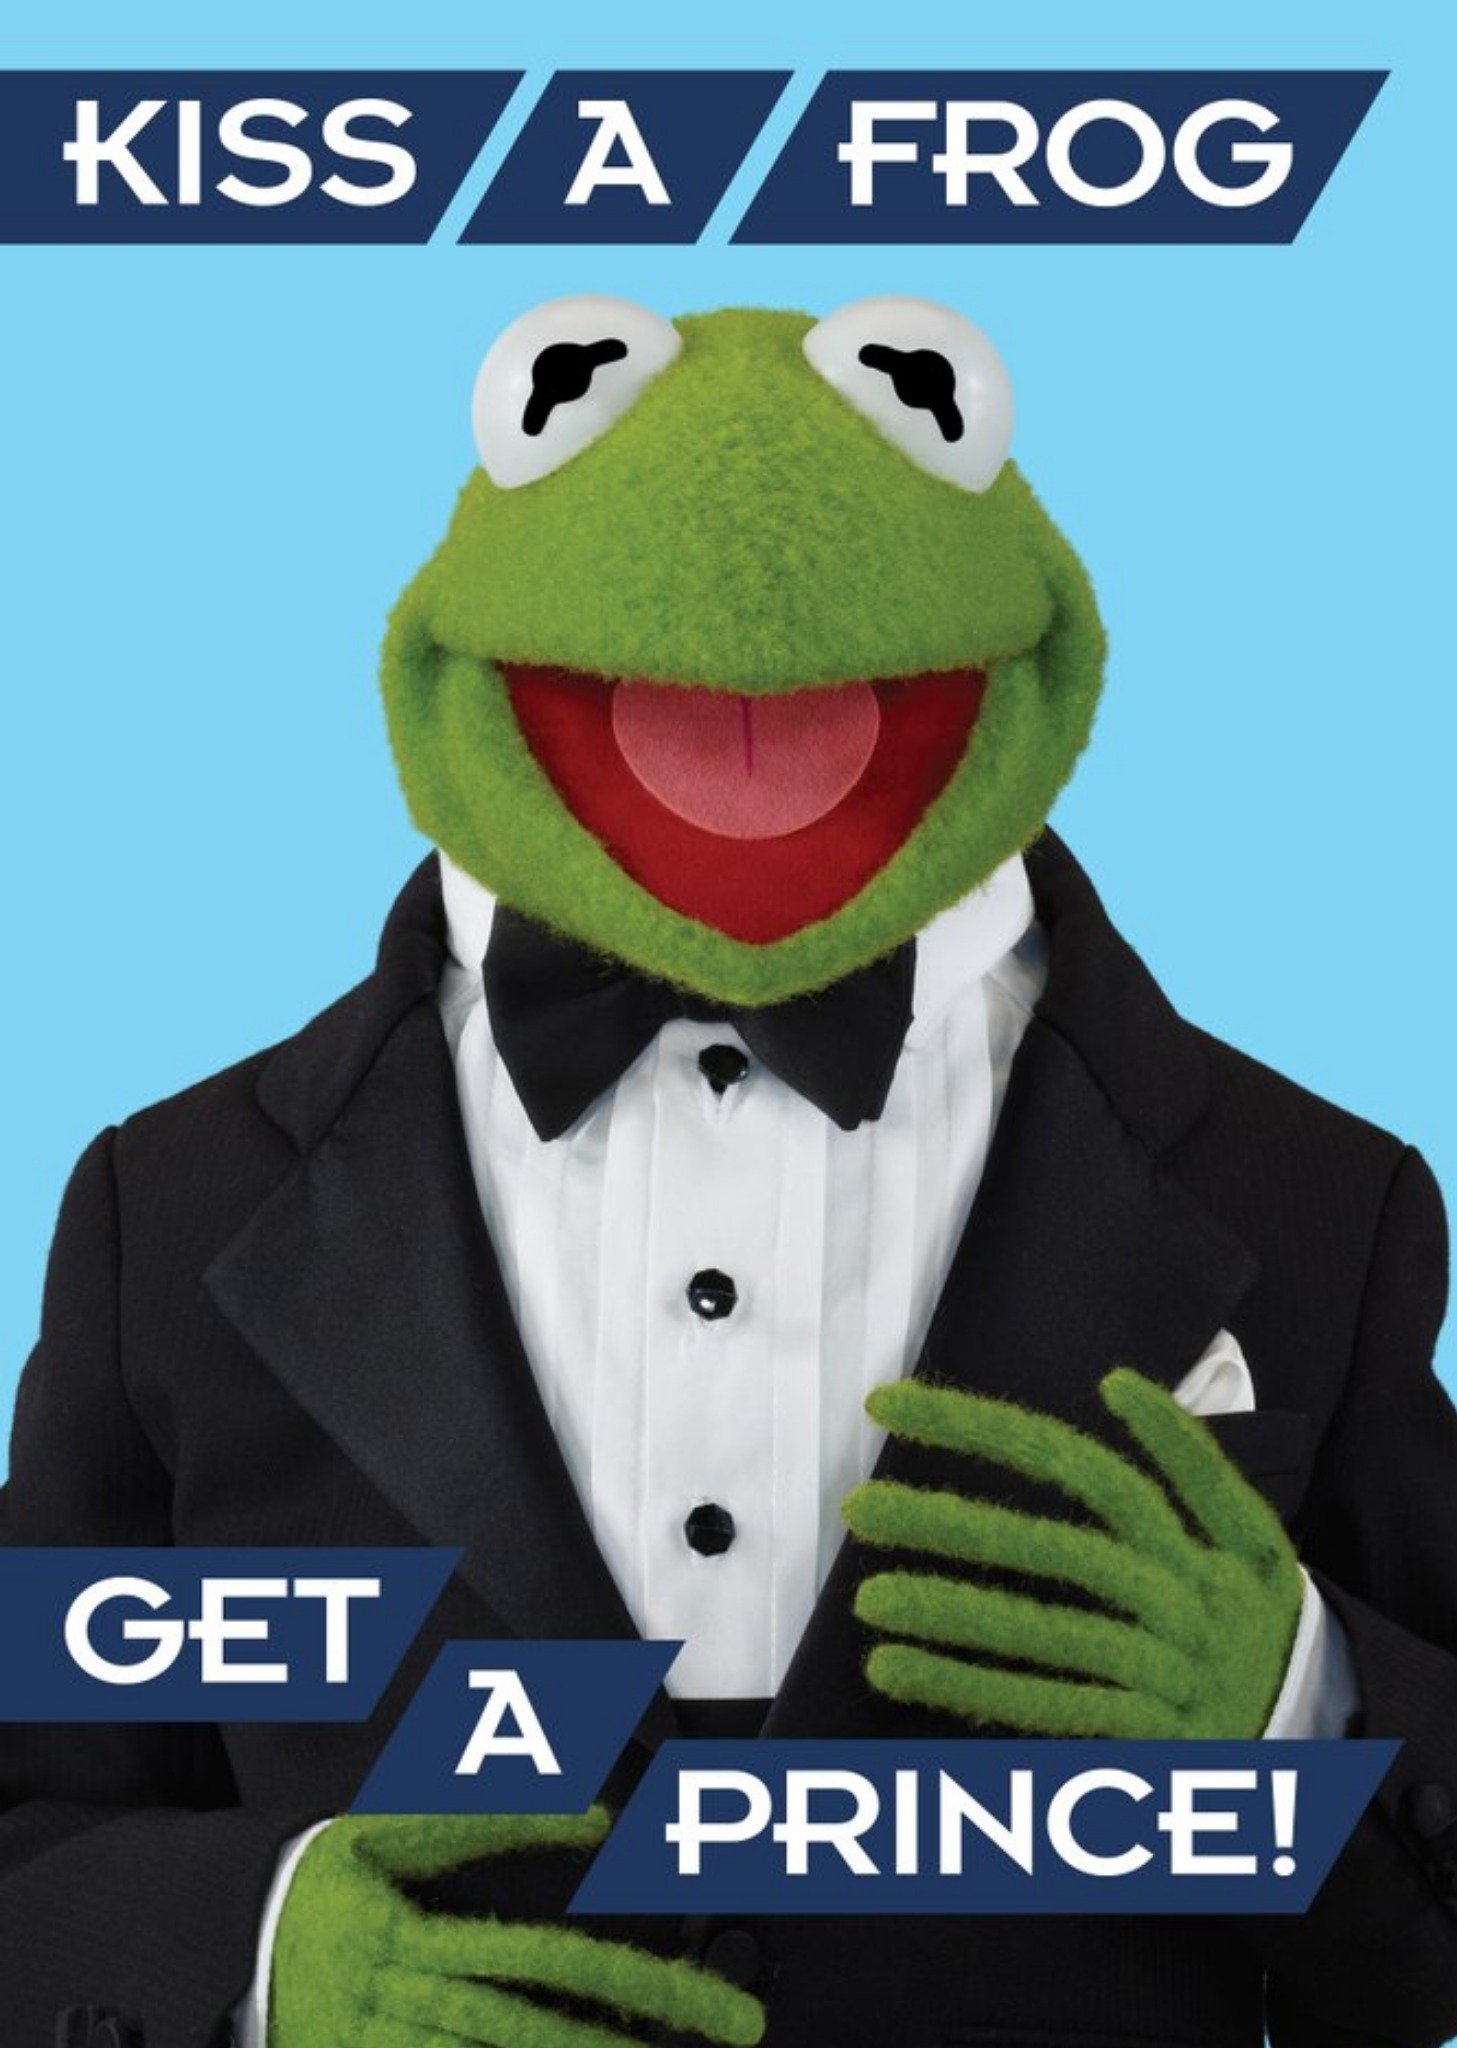 Disney The Muppets Kermit Kiss A Frog, Get A Prince Card Ecard